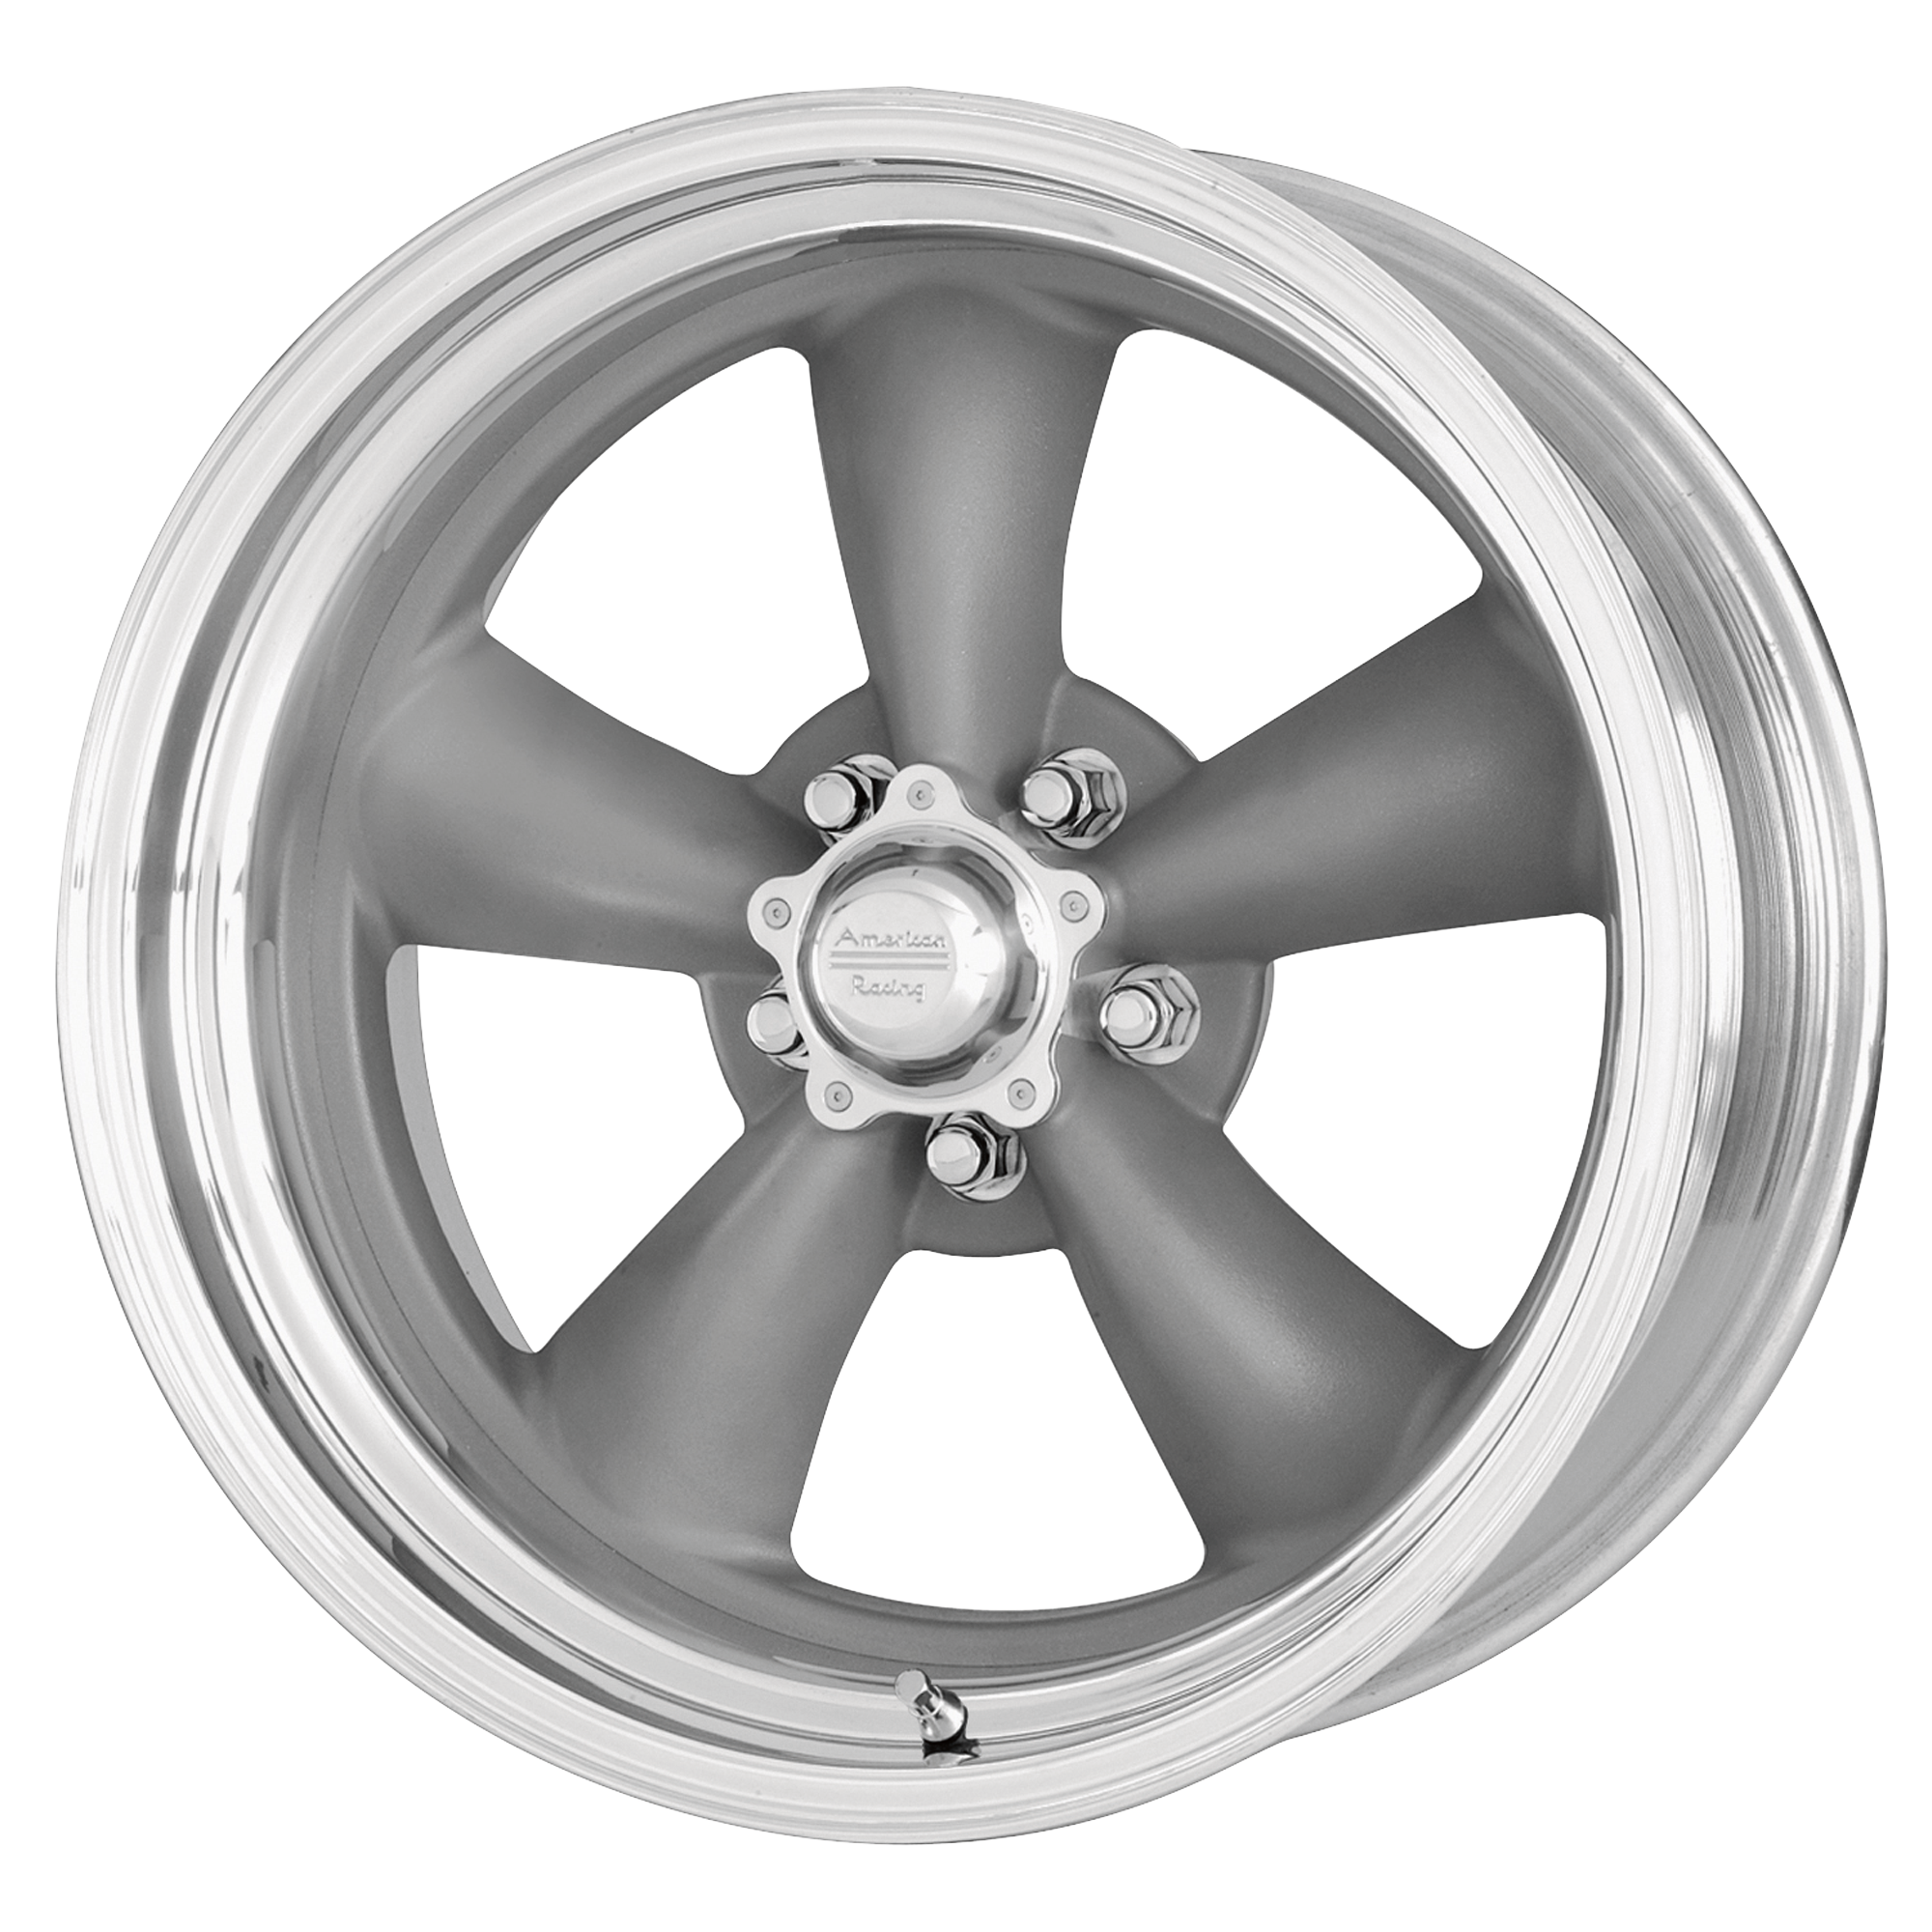 CLASSIC TORQ THRUST II ONE PIECE 15x8 5x114.30 MAG GRAY W/ MACHINED LIP (-18 mm) - Tires and Engine Performance